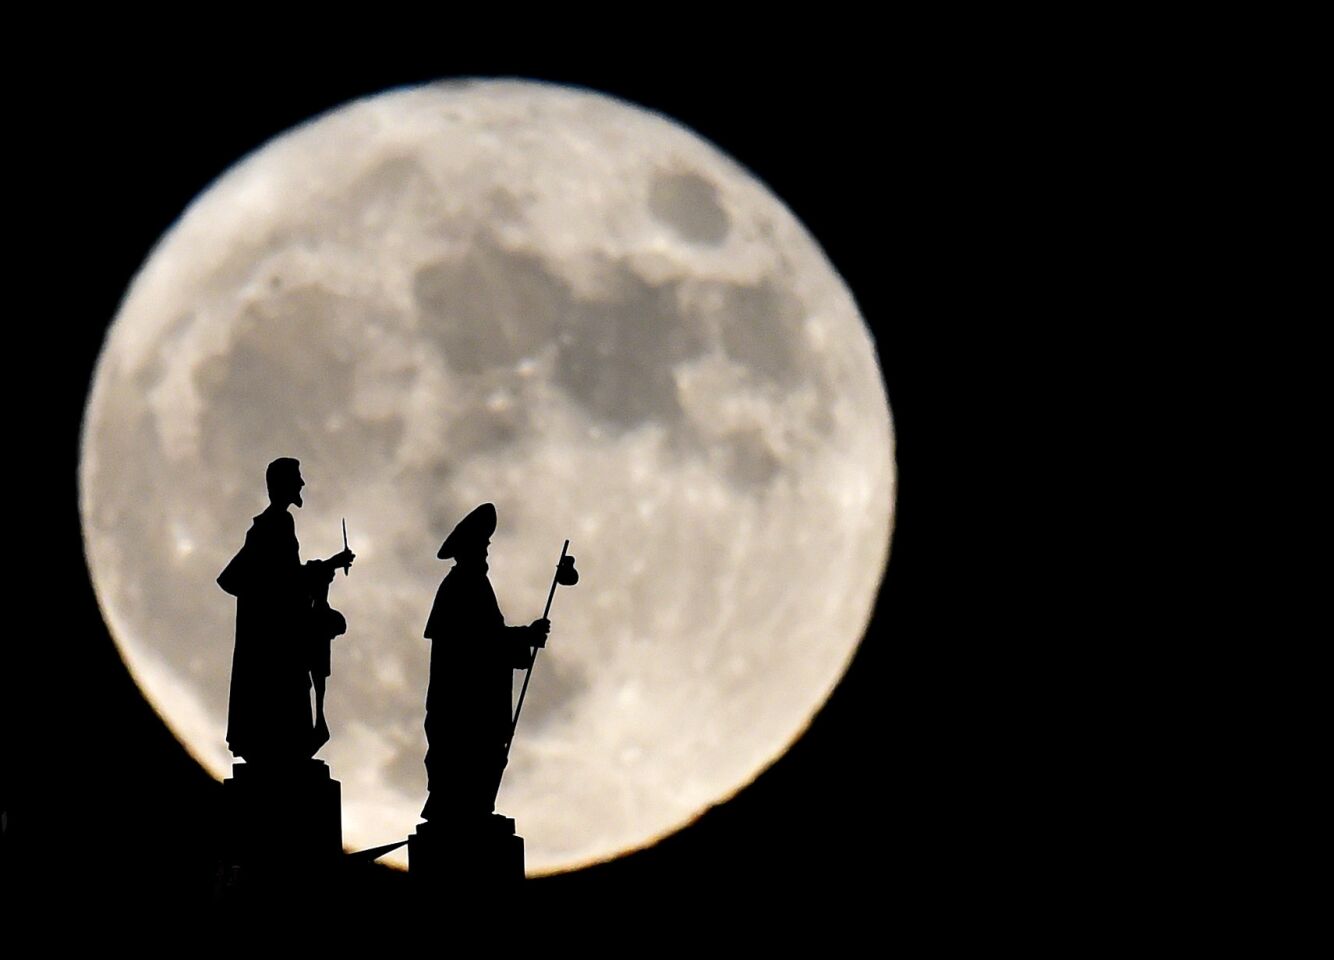 Statues on the Almudena Cathedral are silhouetted against a supermoon in Madrid, Spain.